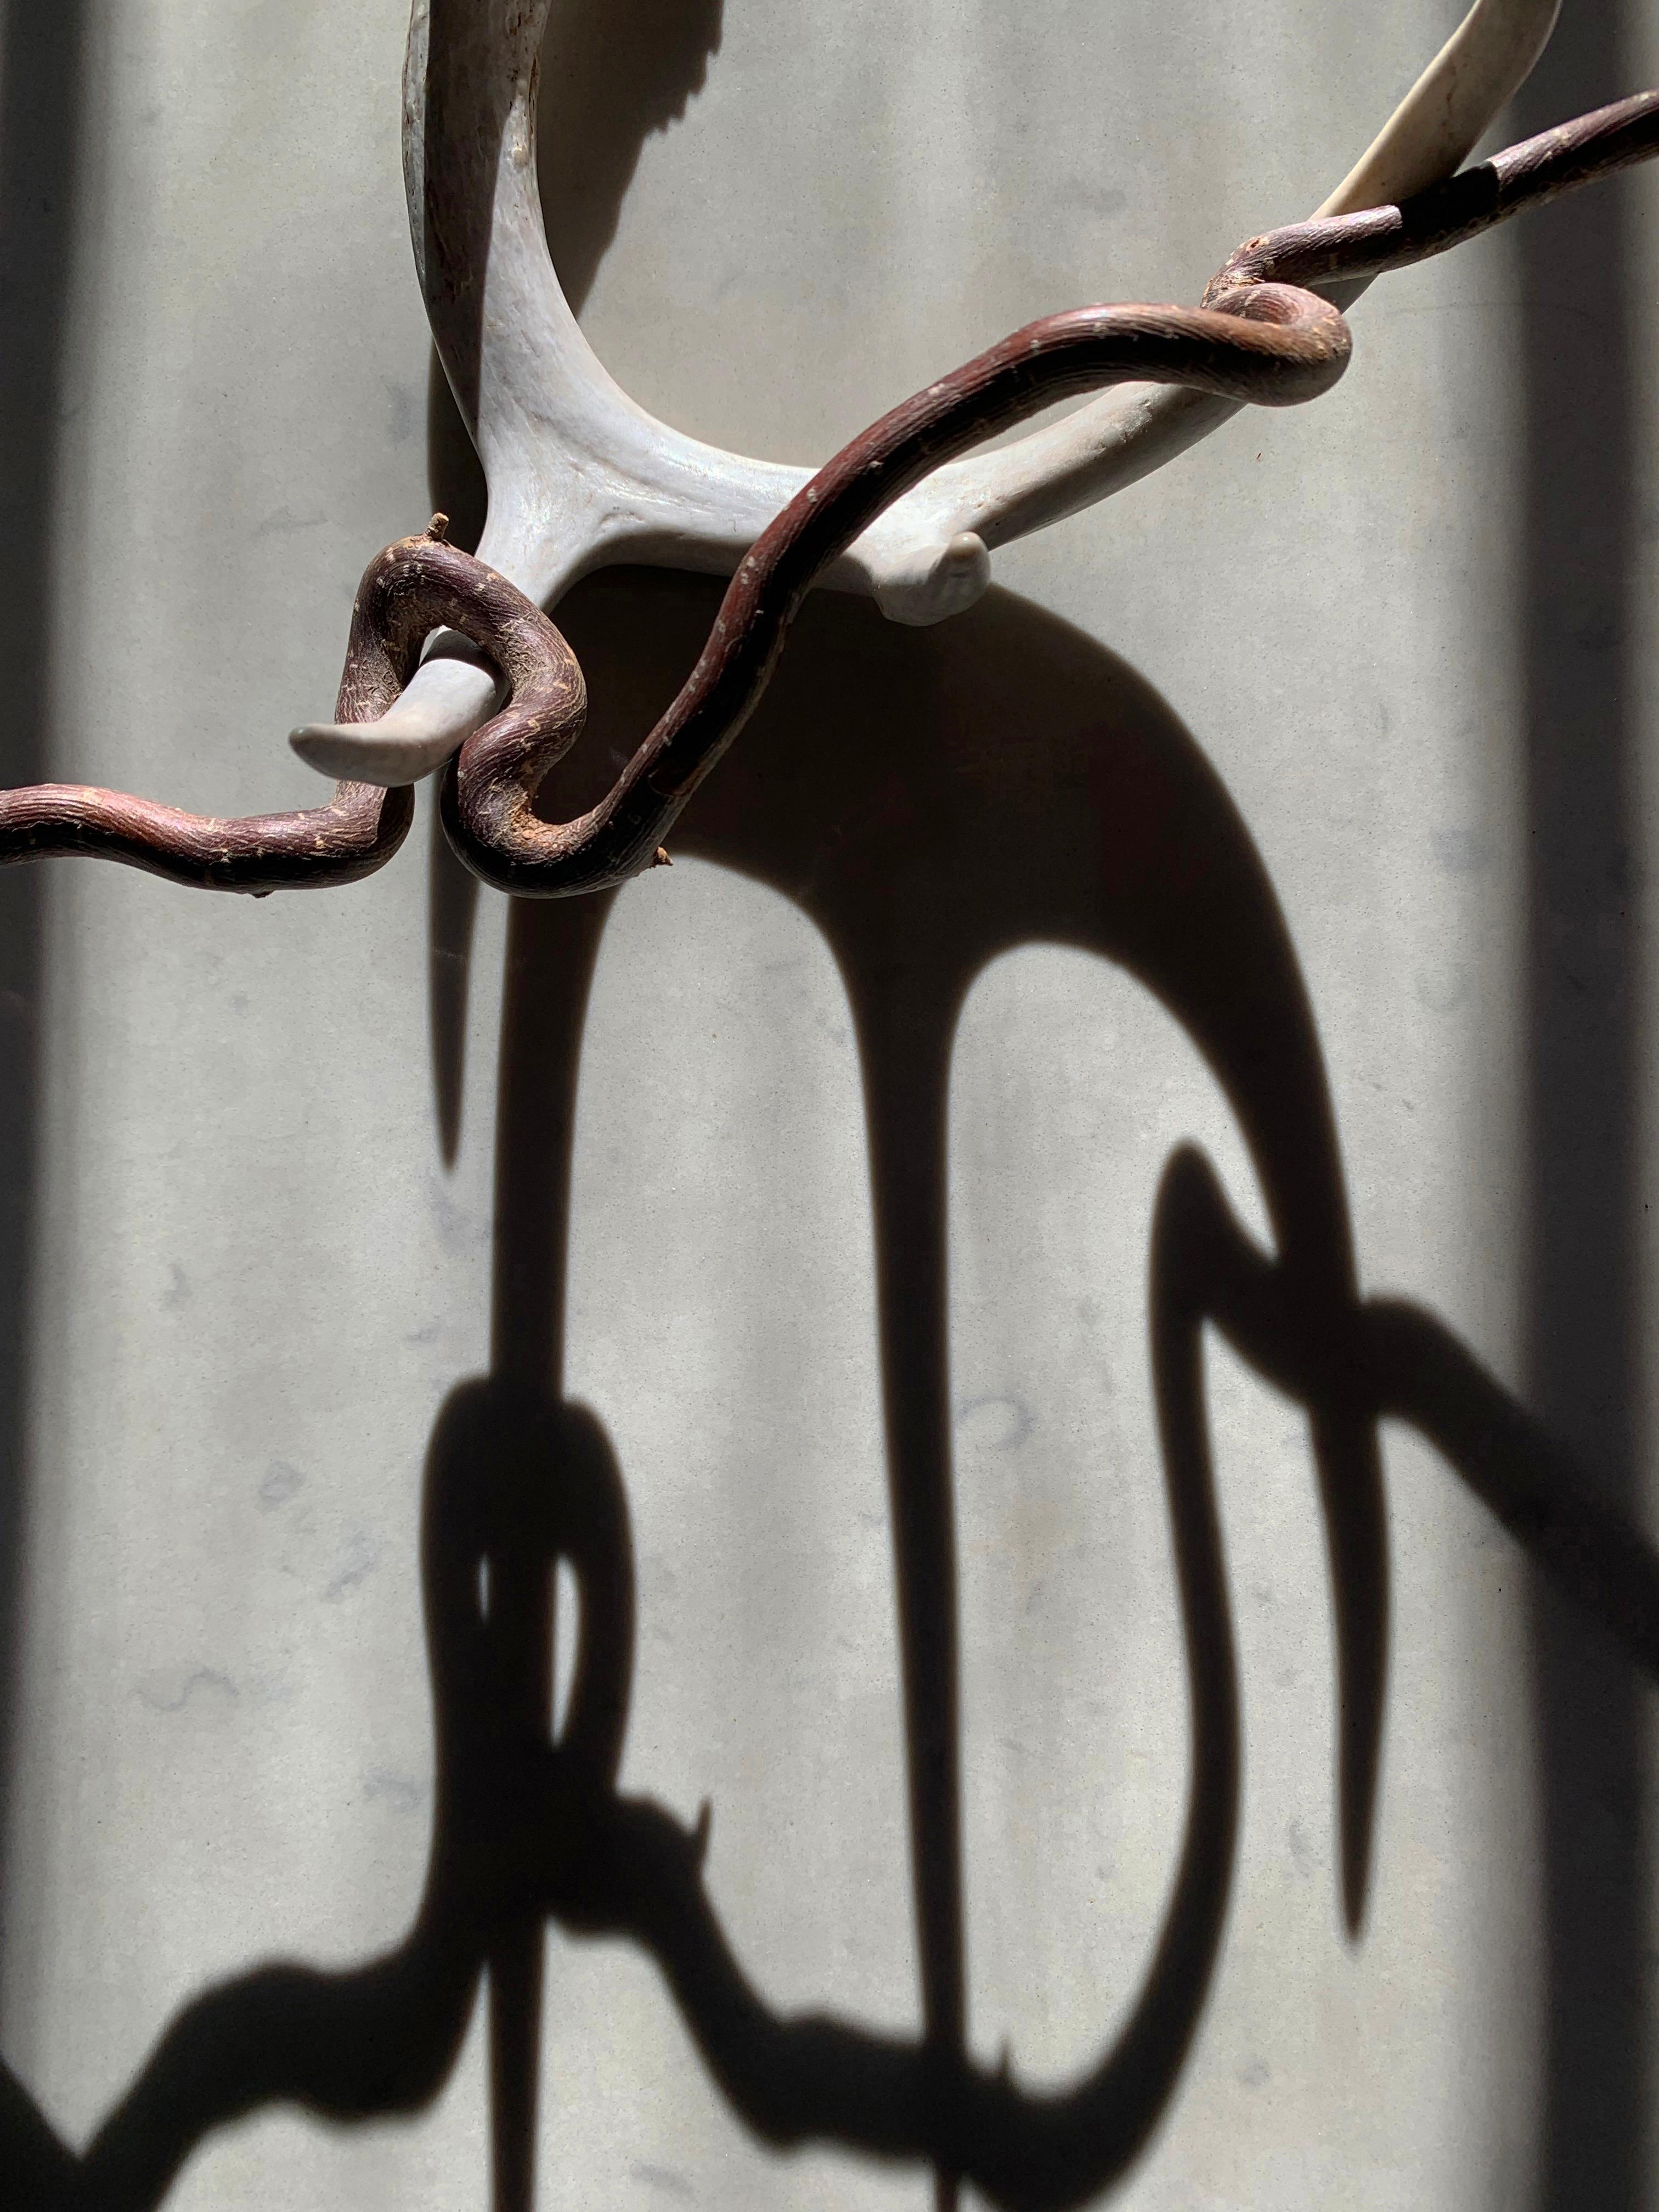 Untitled (2159): still life photograph w/ antler & abstract shadow patterns, lg